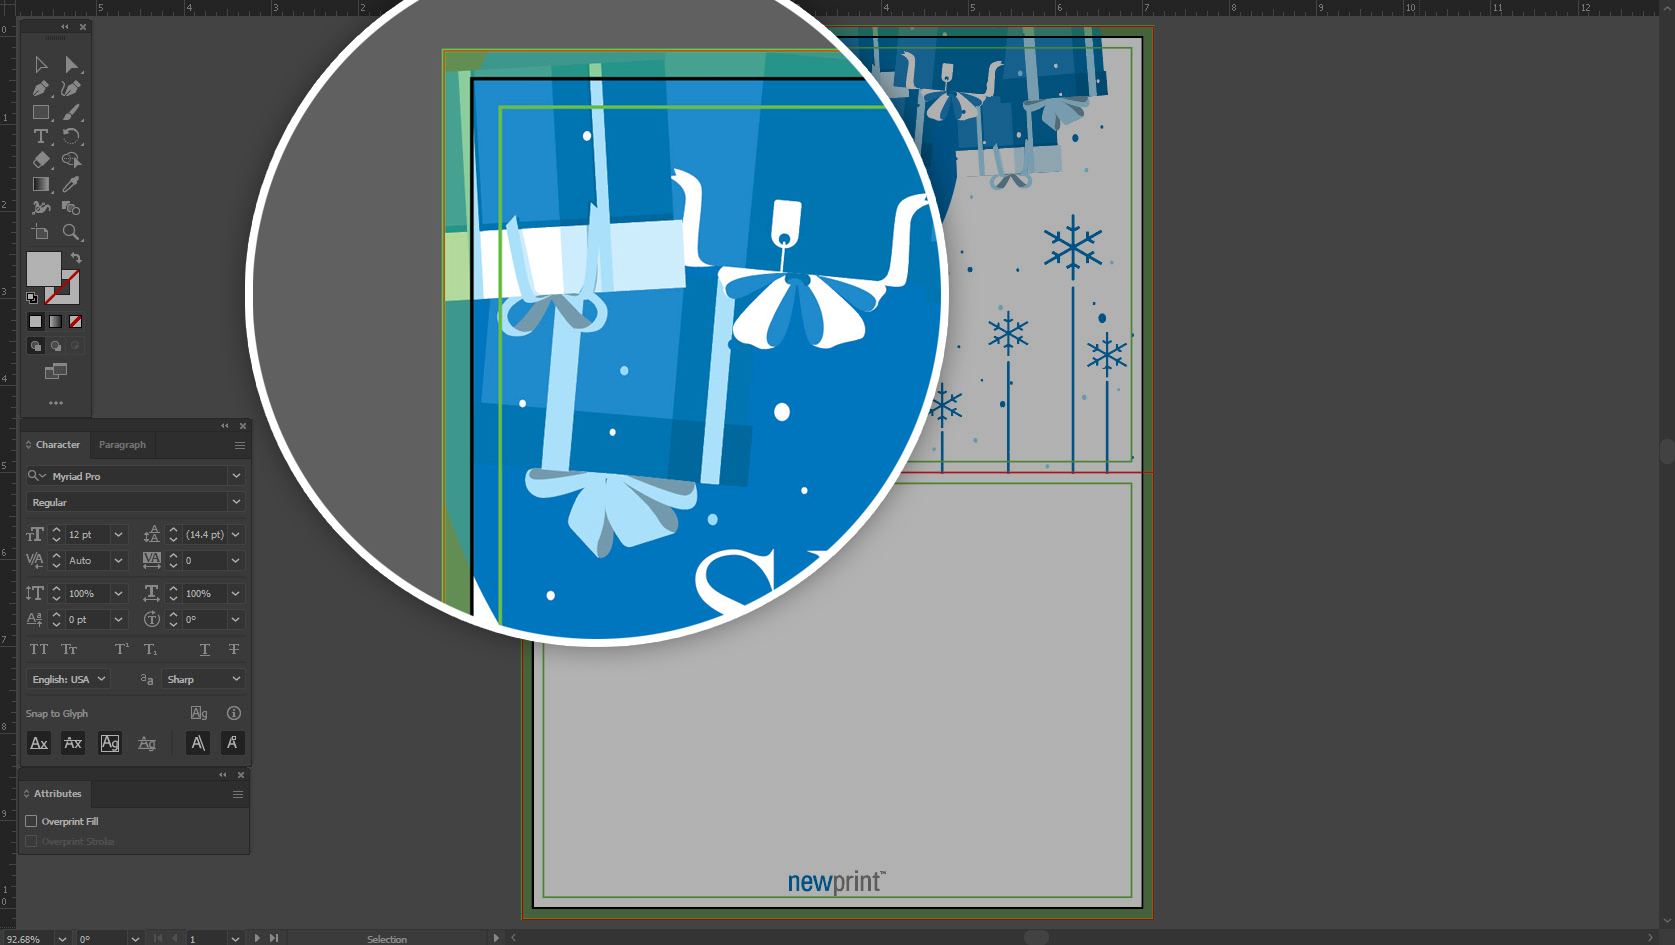 Screen shot of an Adobe Illustrator print template with a design applied zooming in on the bleed area.